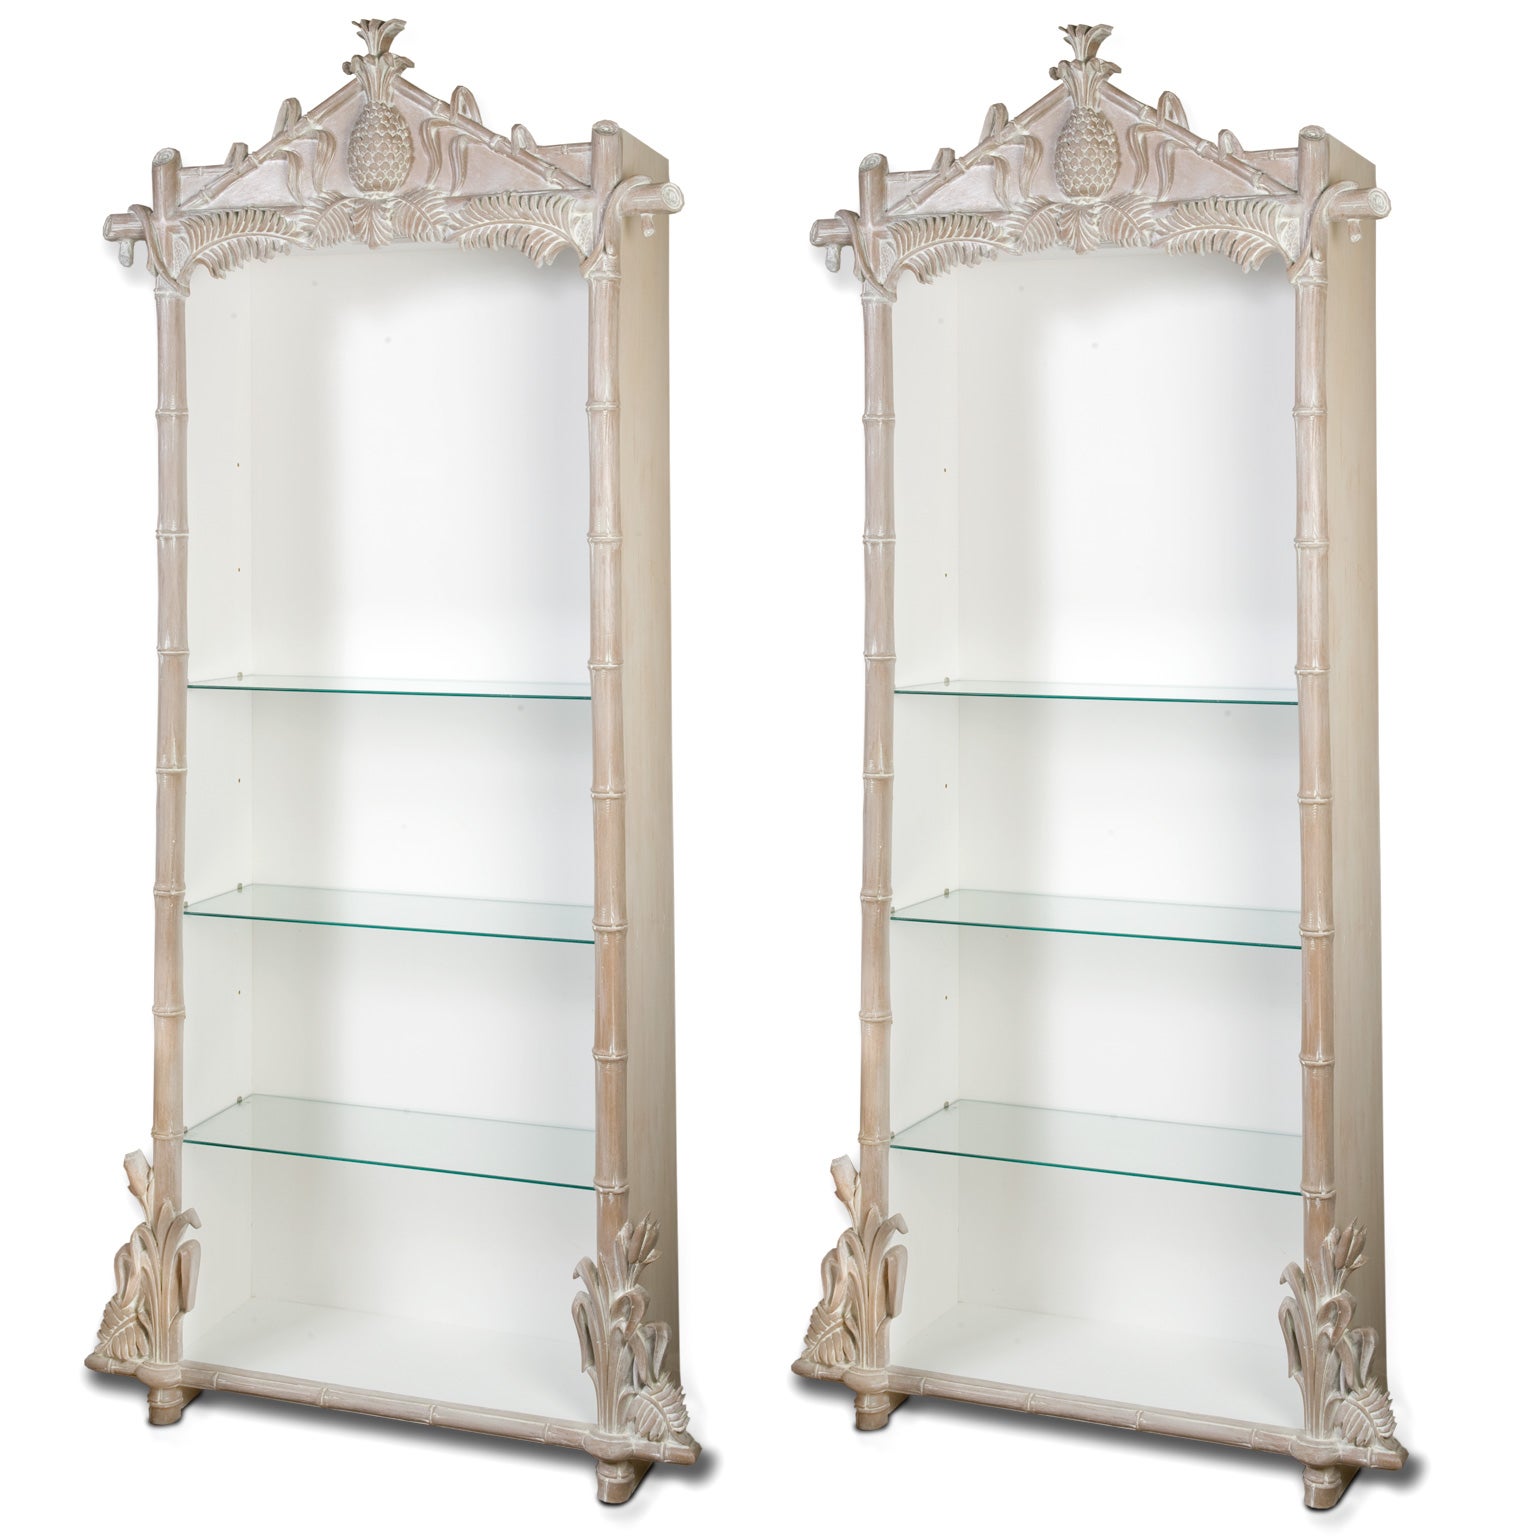 Pair of White Washed Display Shelves or Cupboards by Gampel Stoll